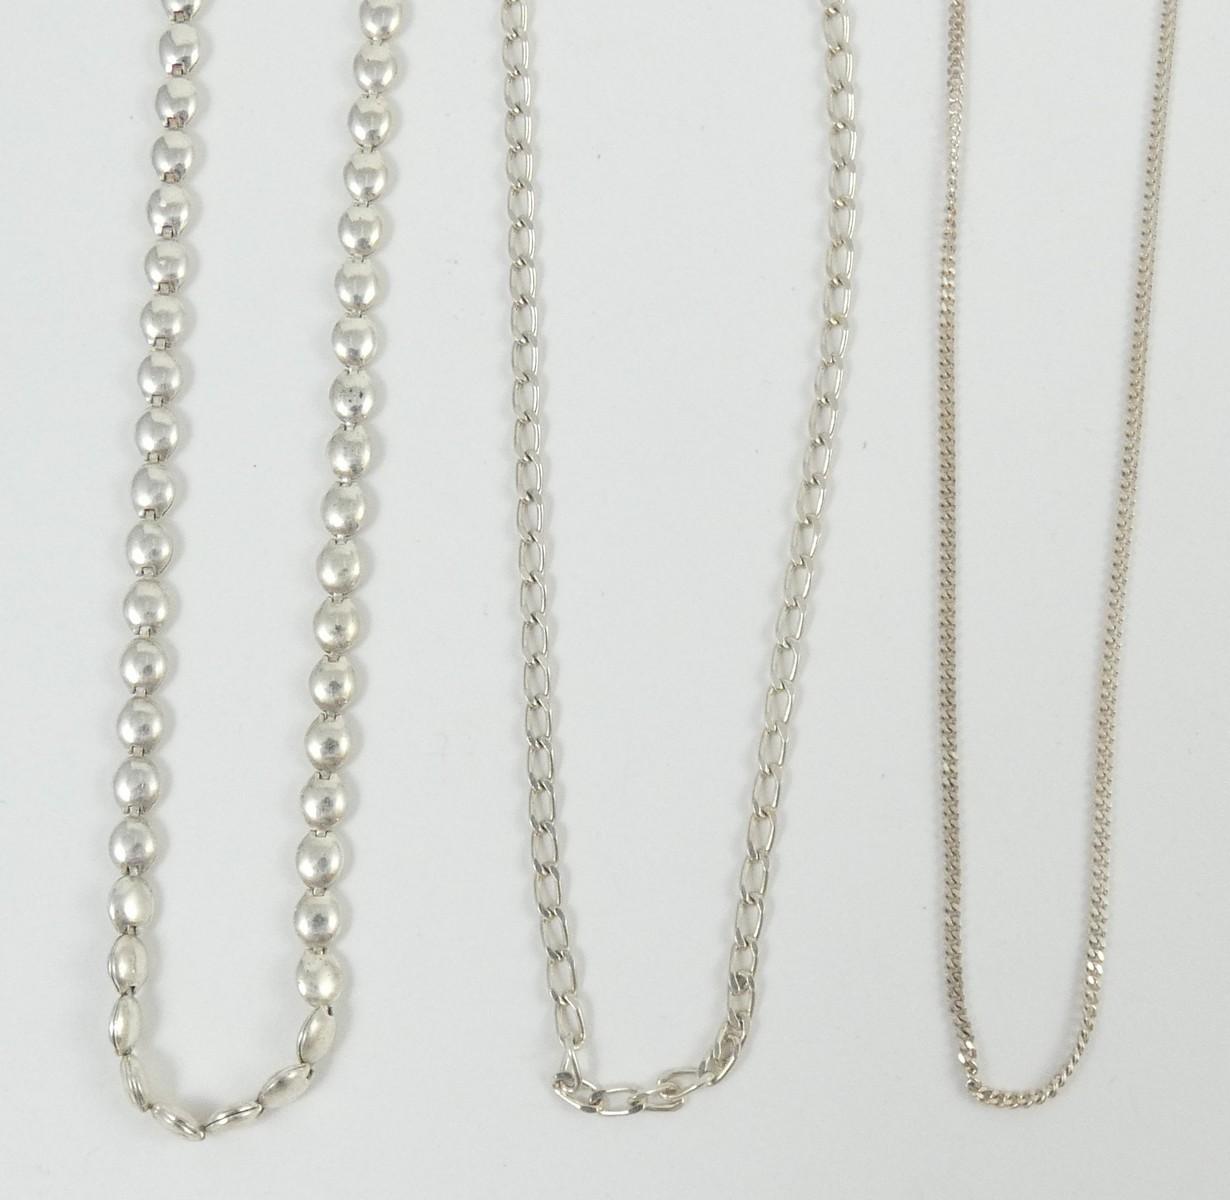 3 STERLING CHAINS